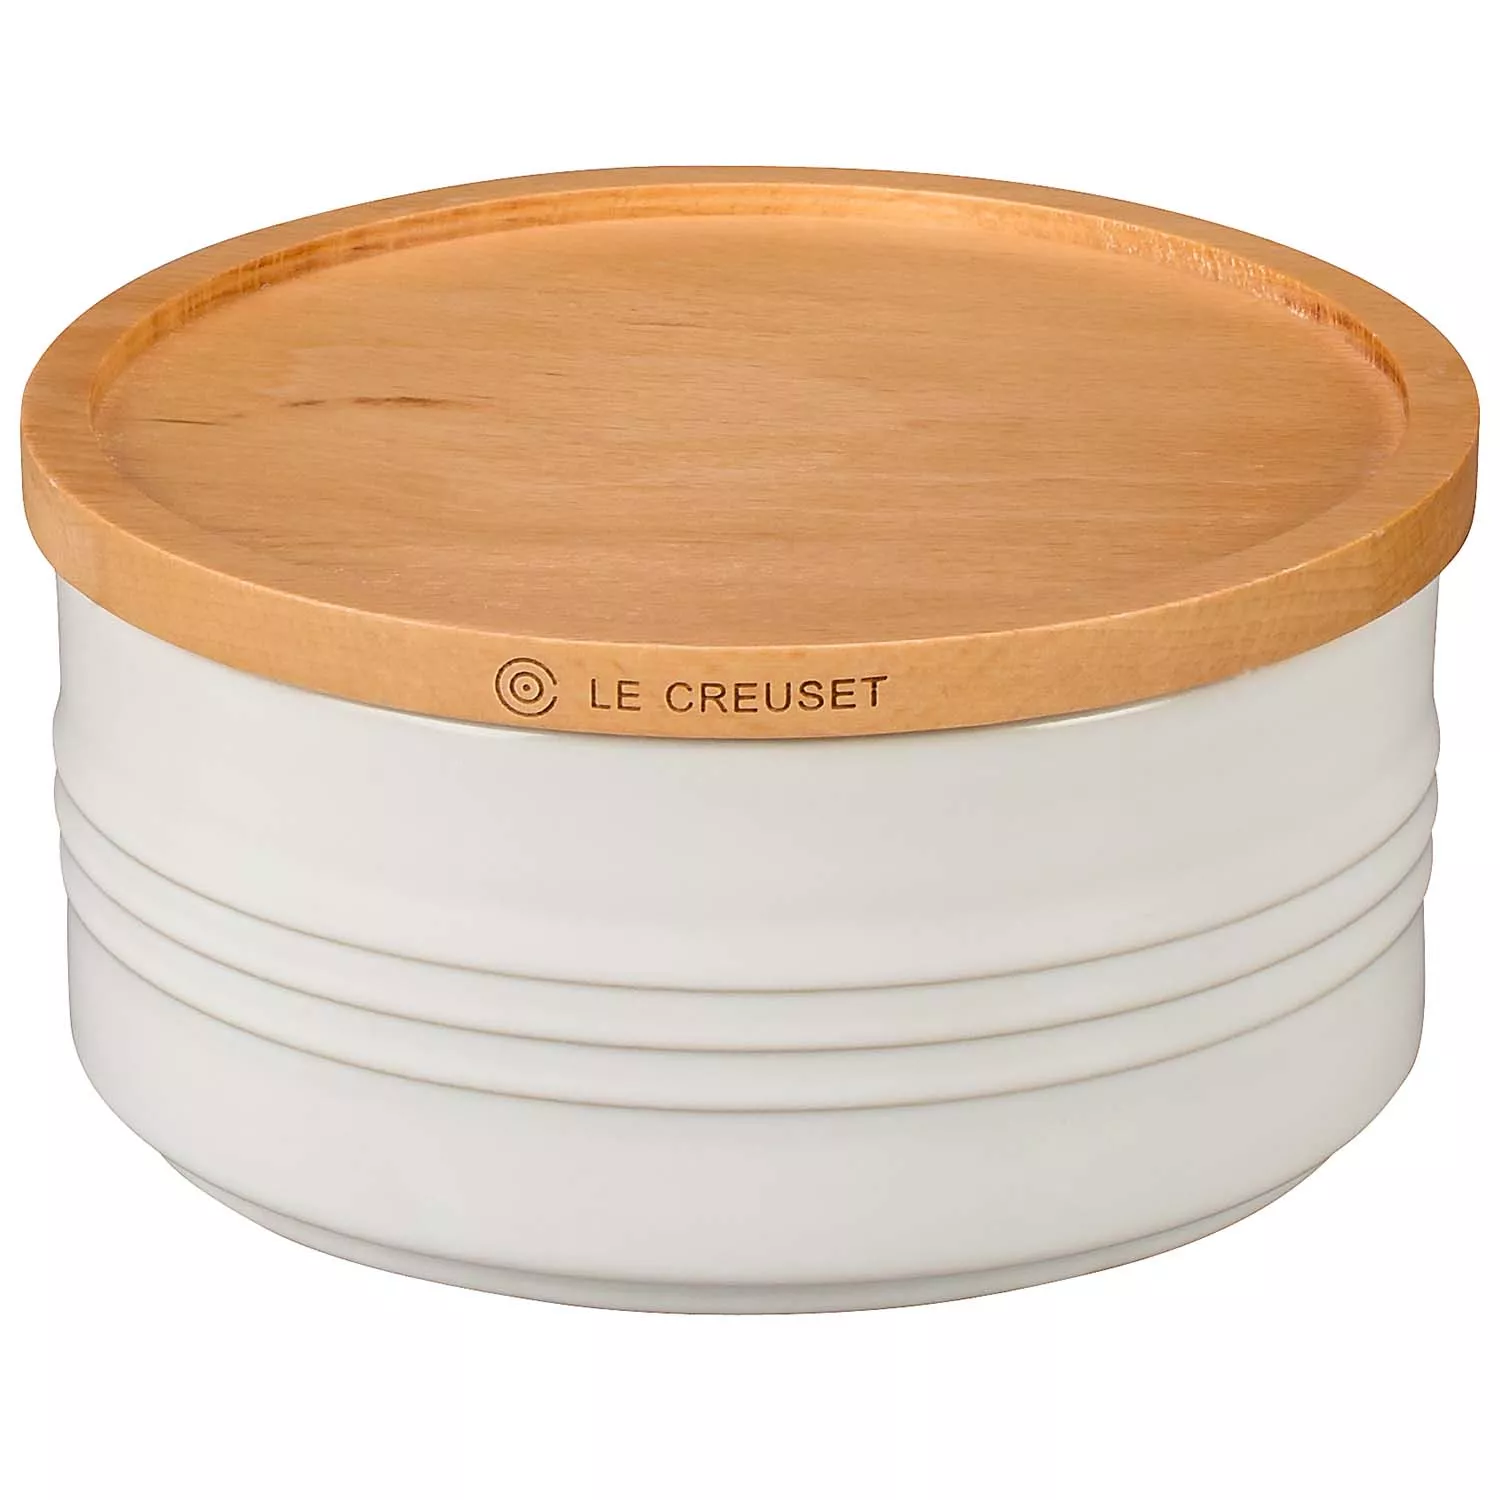 Le Creuset Canister, 23 oz.